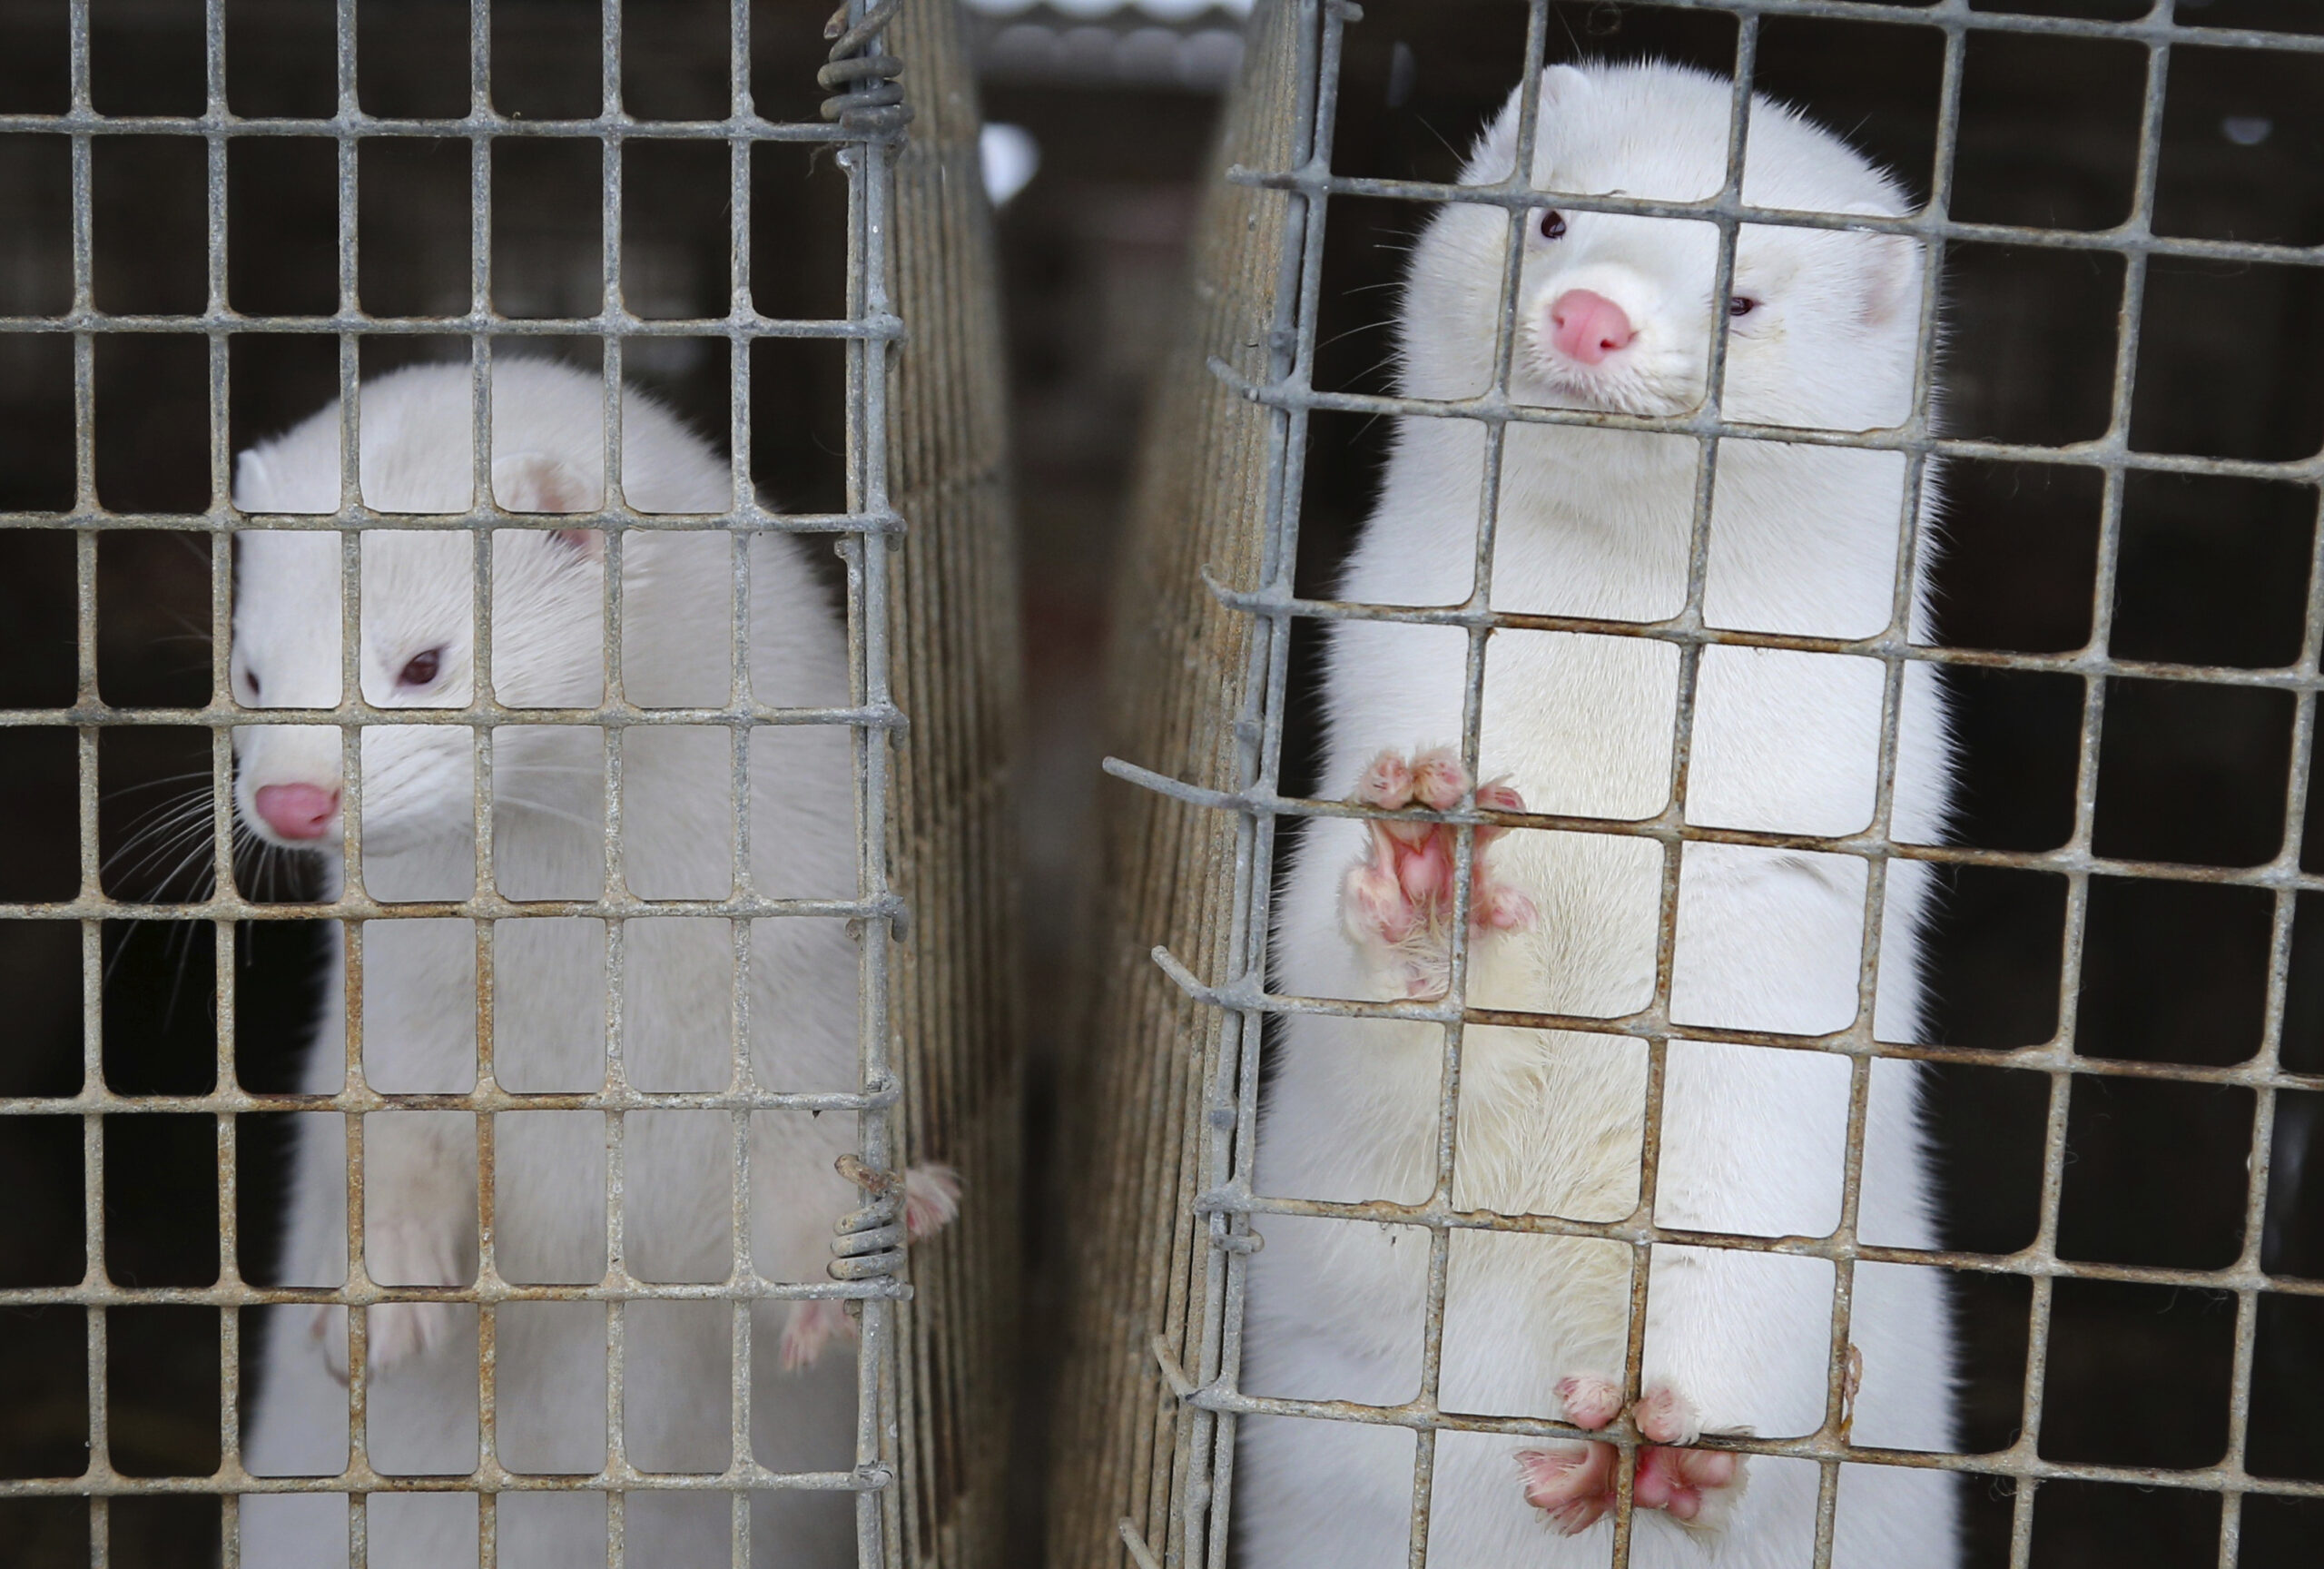 Two white mink in cages